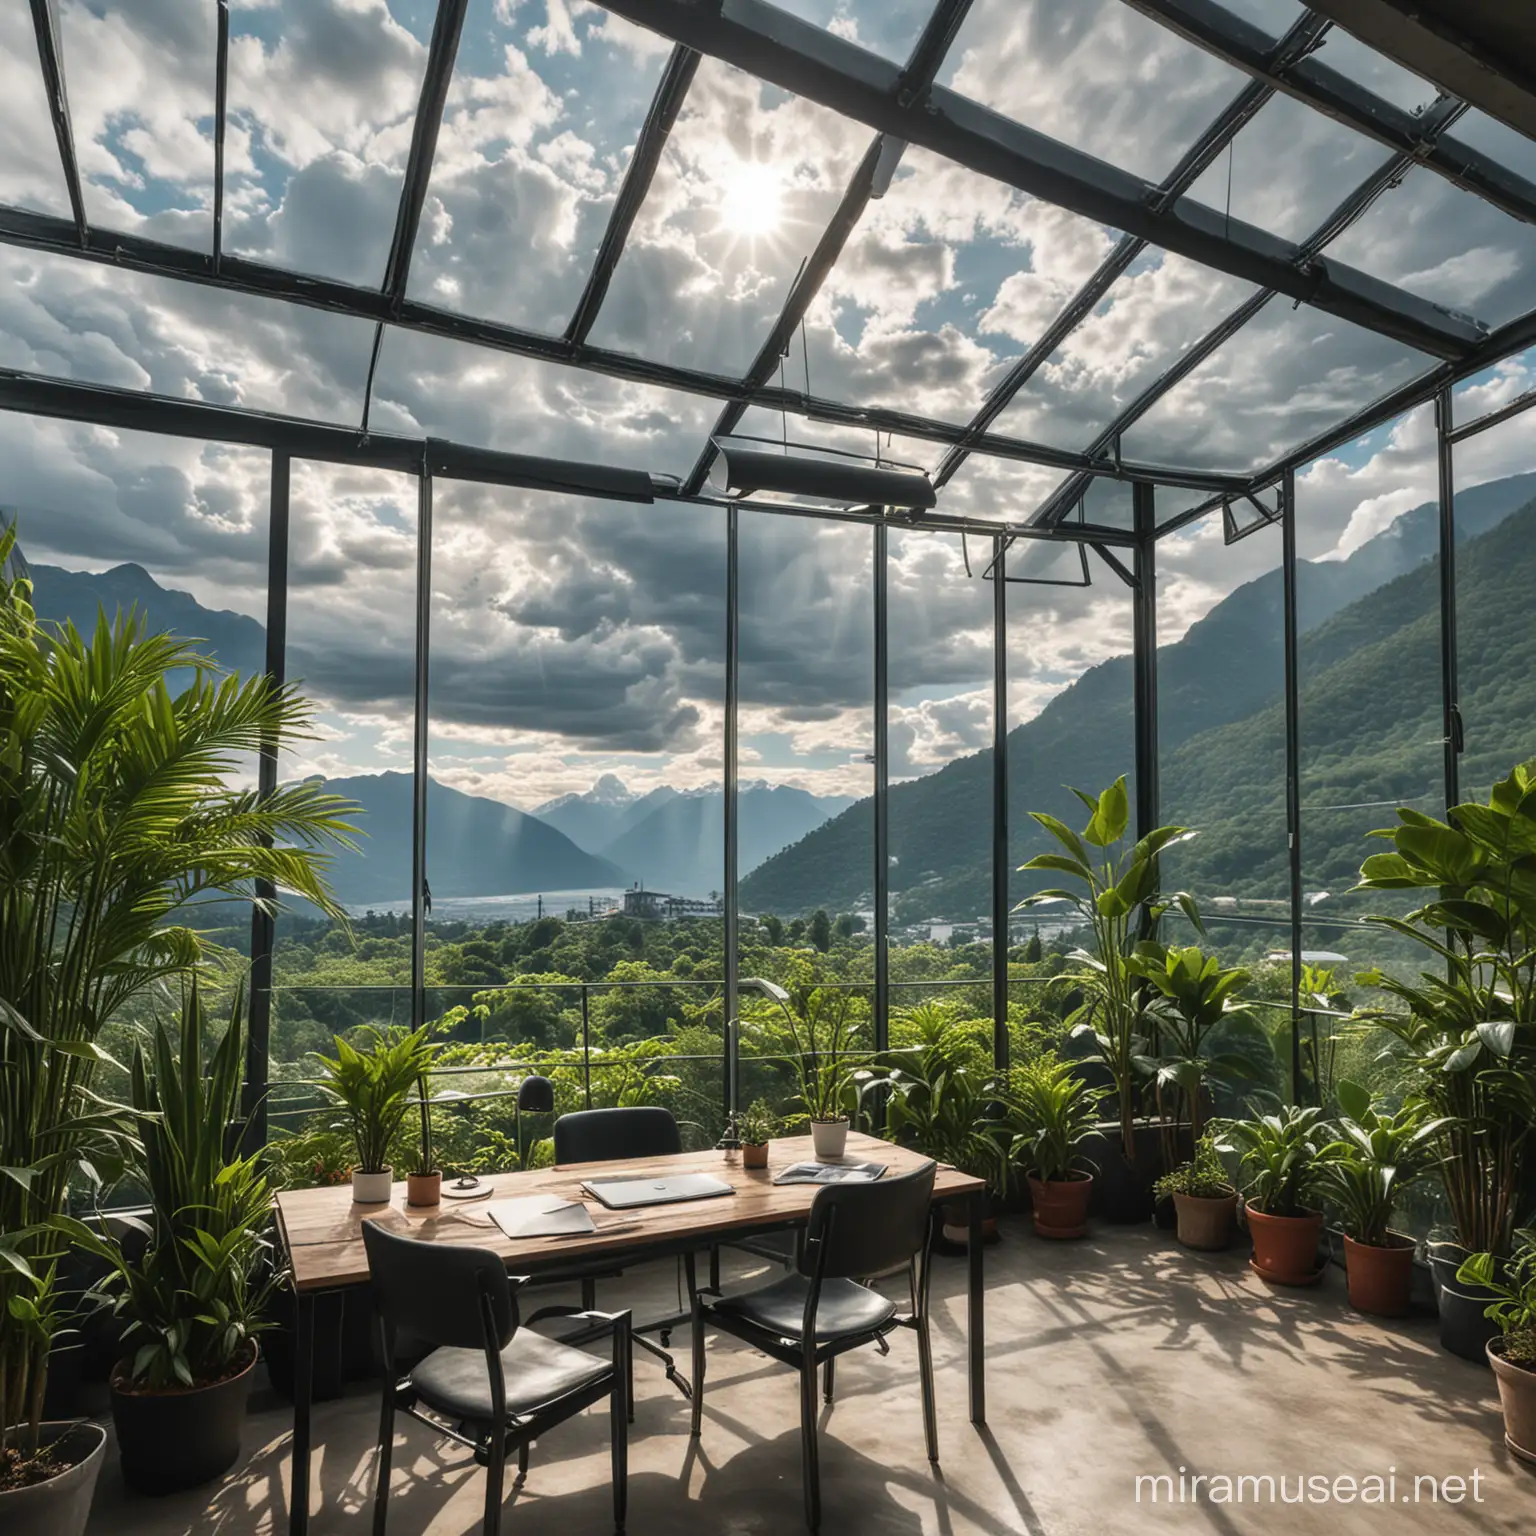 Working space in a glass house with green plants. view to mountains with a dramatic sky with sun and clouds
